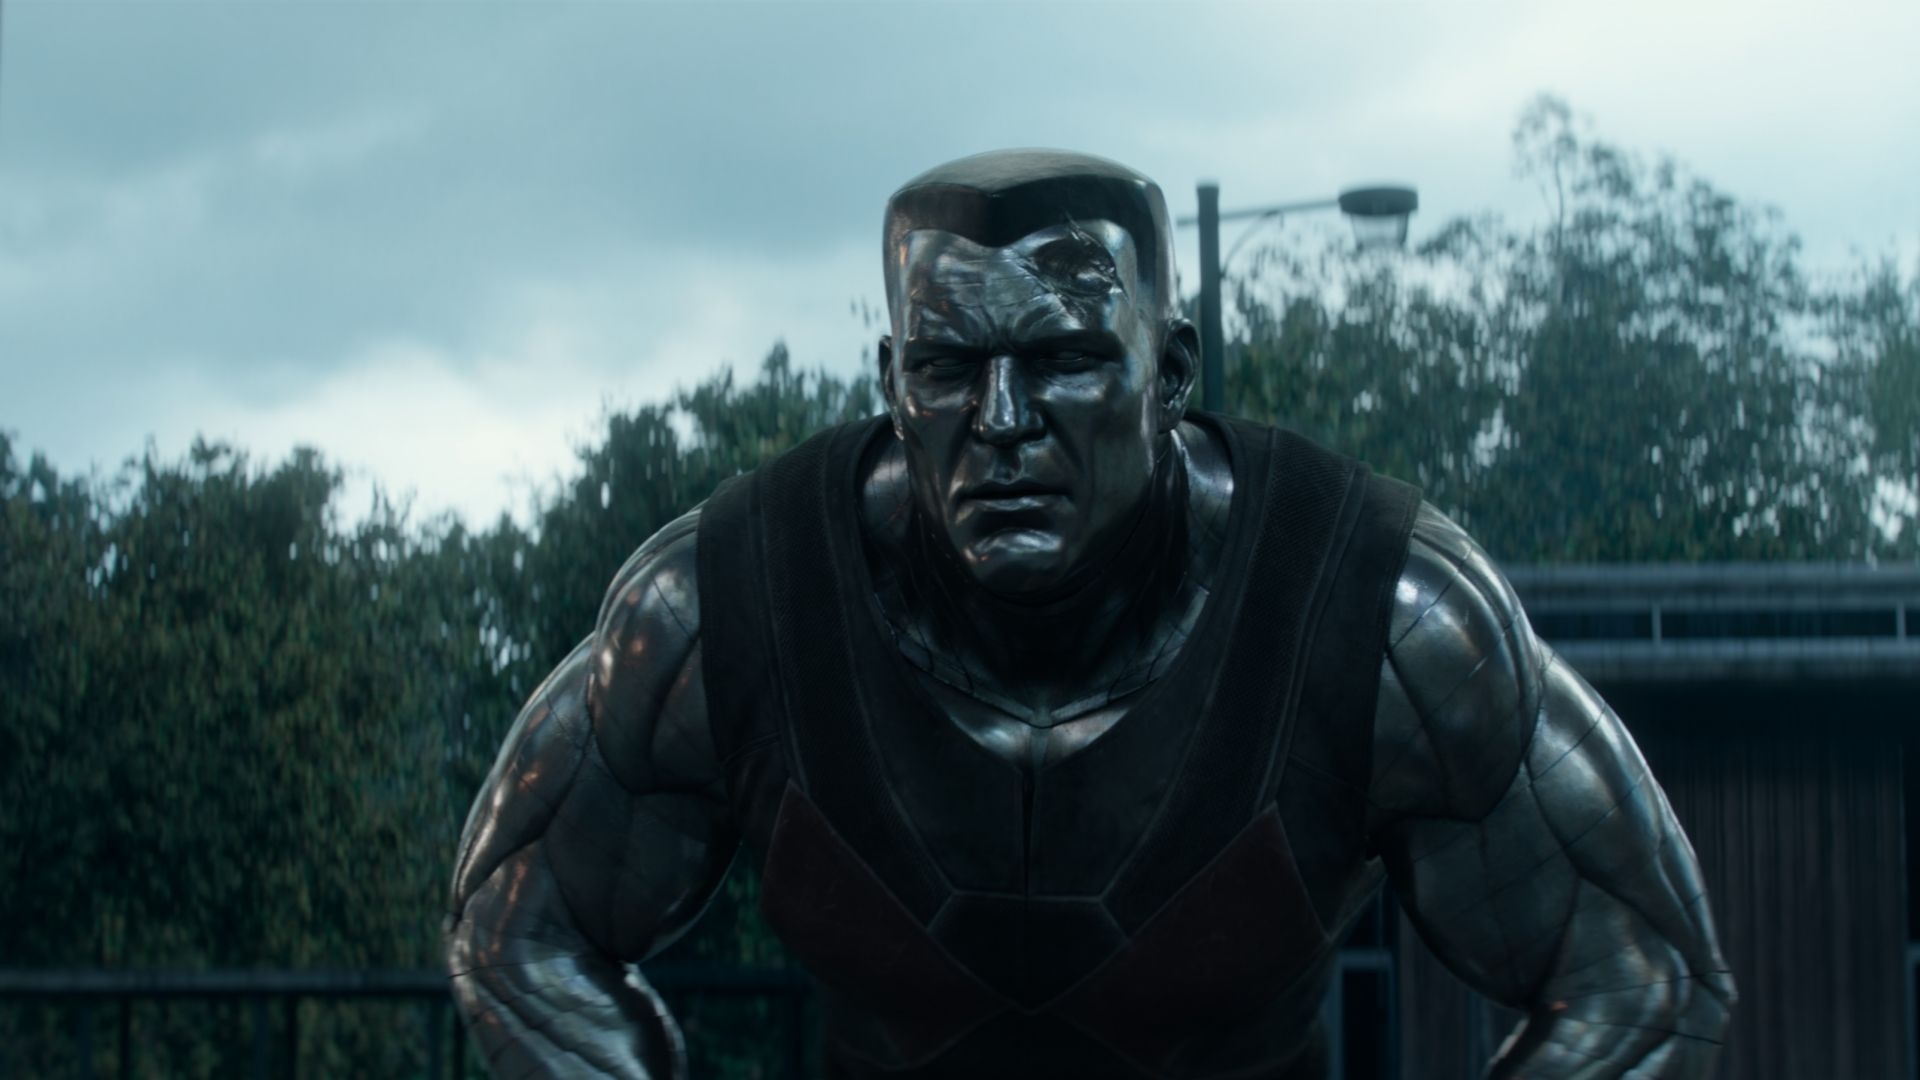 Colossus (Deadpool): A superhero with the ability to transform into a metal giant at will. 1920x1080 Full HD Background.